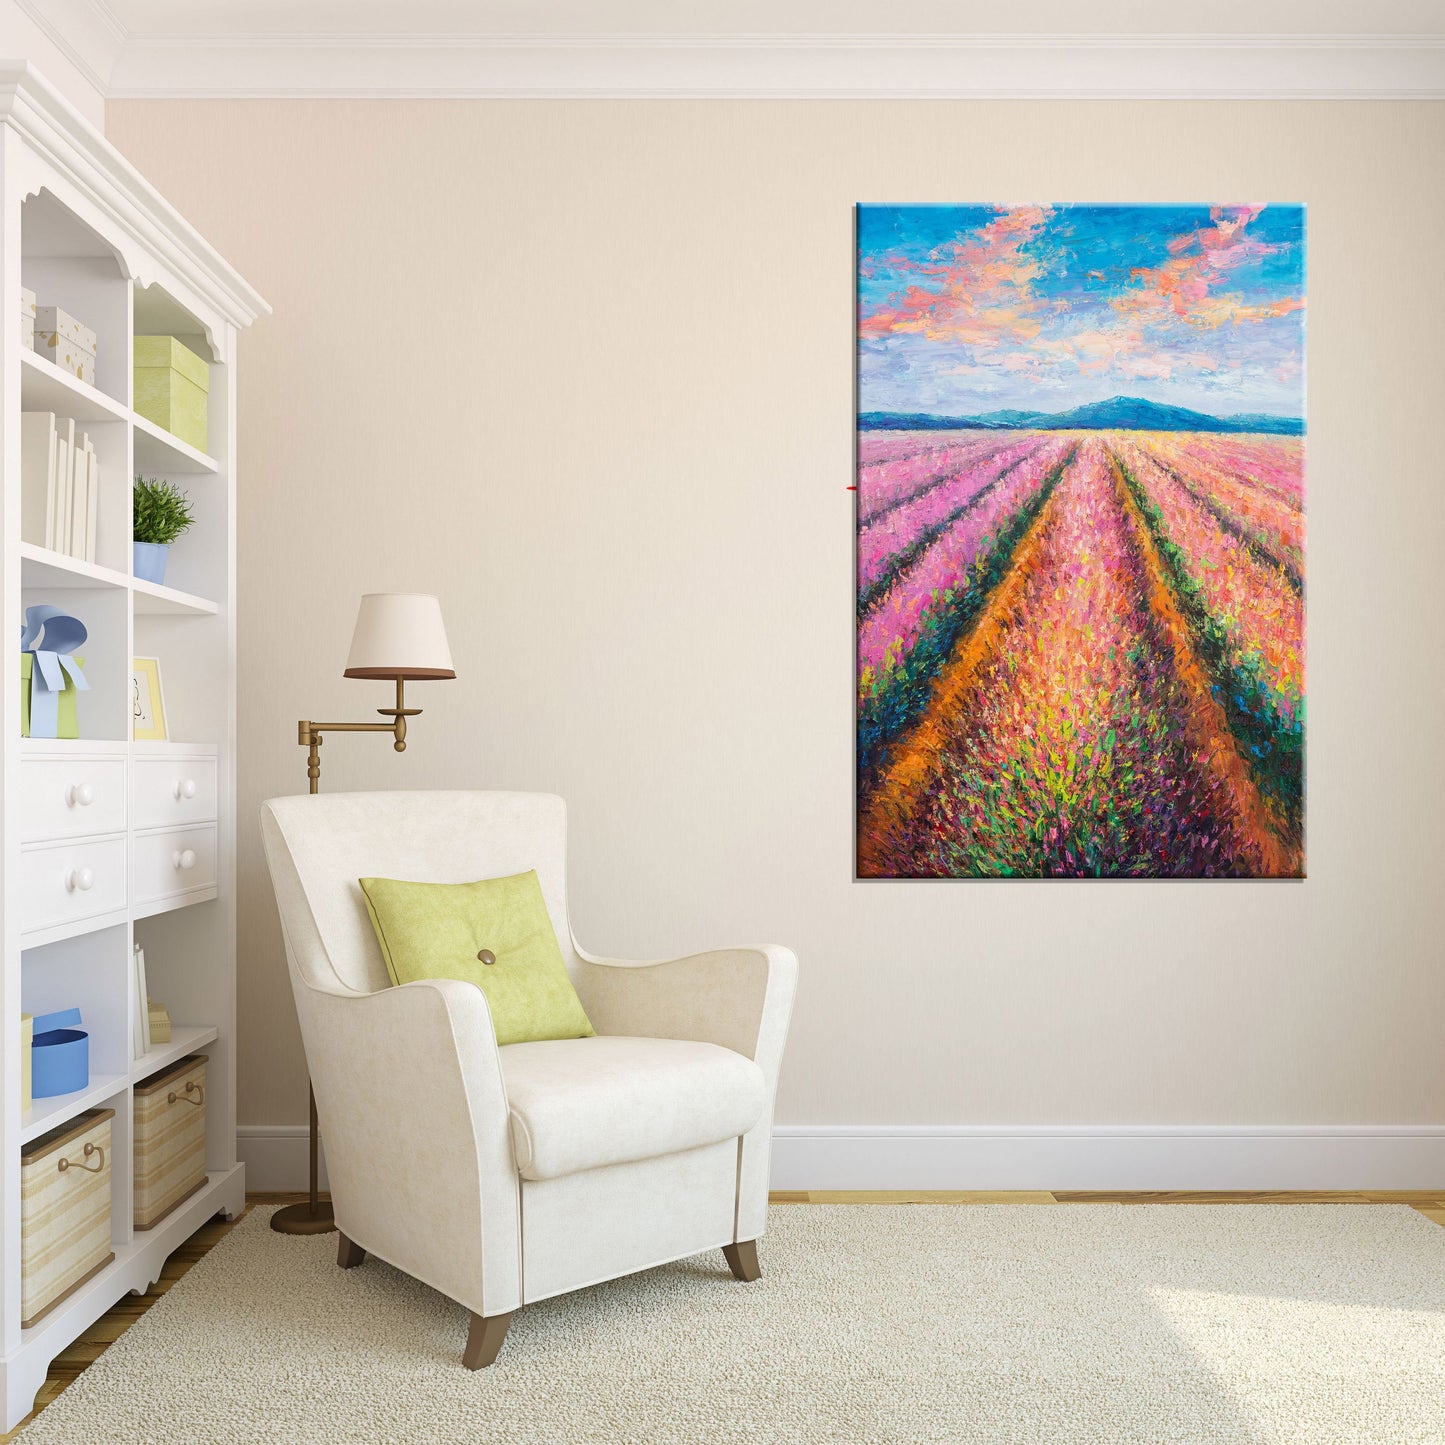 Oil Painting, Large Canvas Art, Large Landscape Painting, Contemporary Art, Rustic Wall Decor, Canvas Art, French Provence Lavender Field